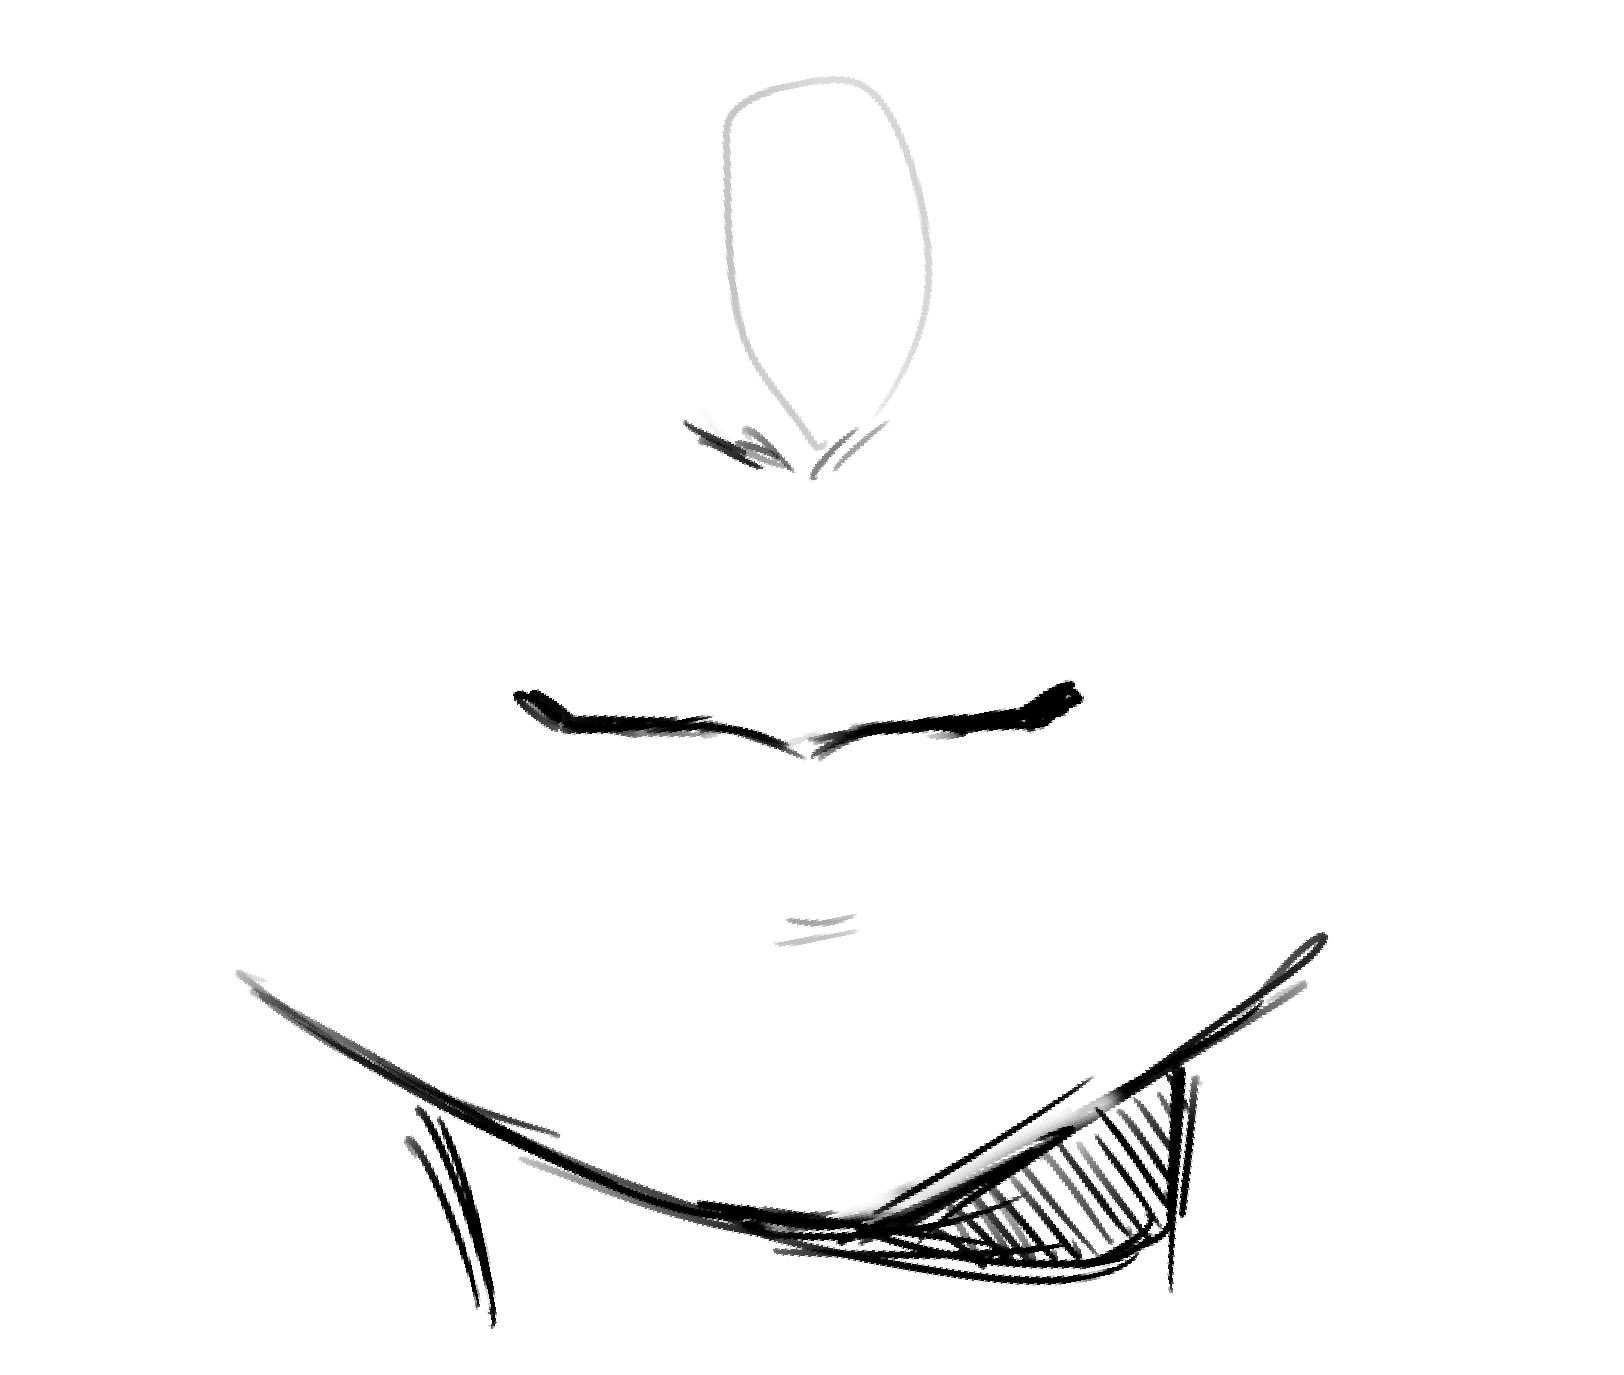 how to draw boy mouth